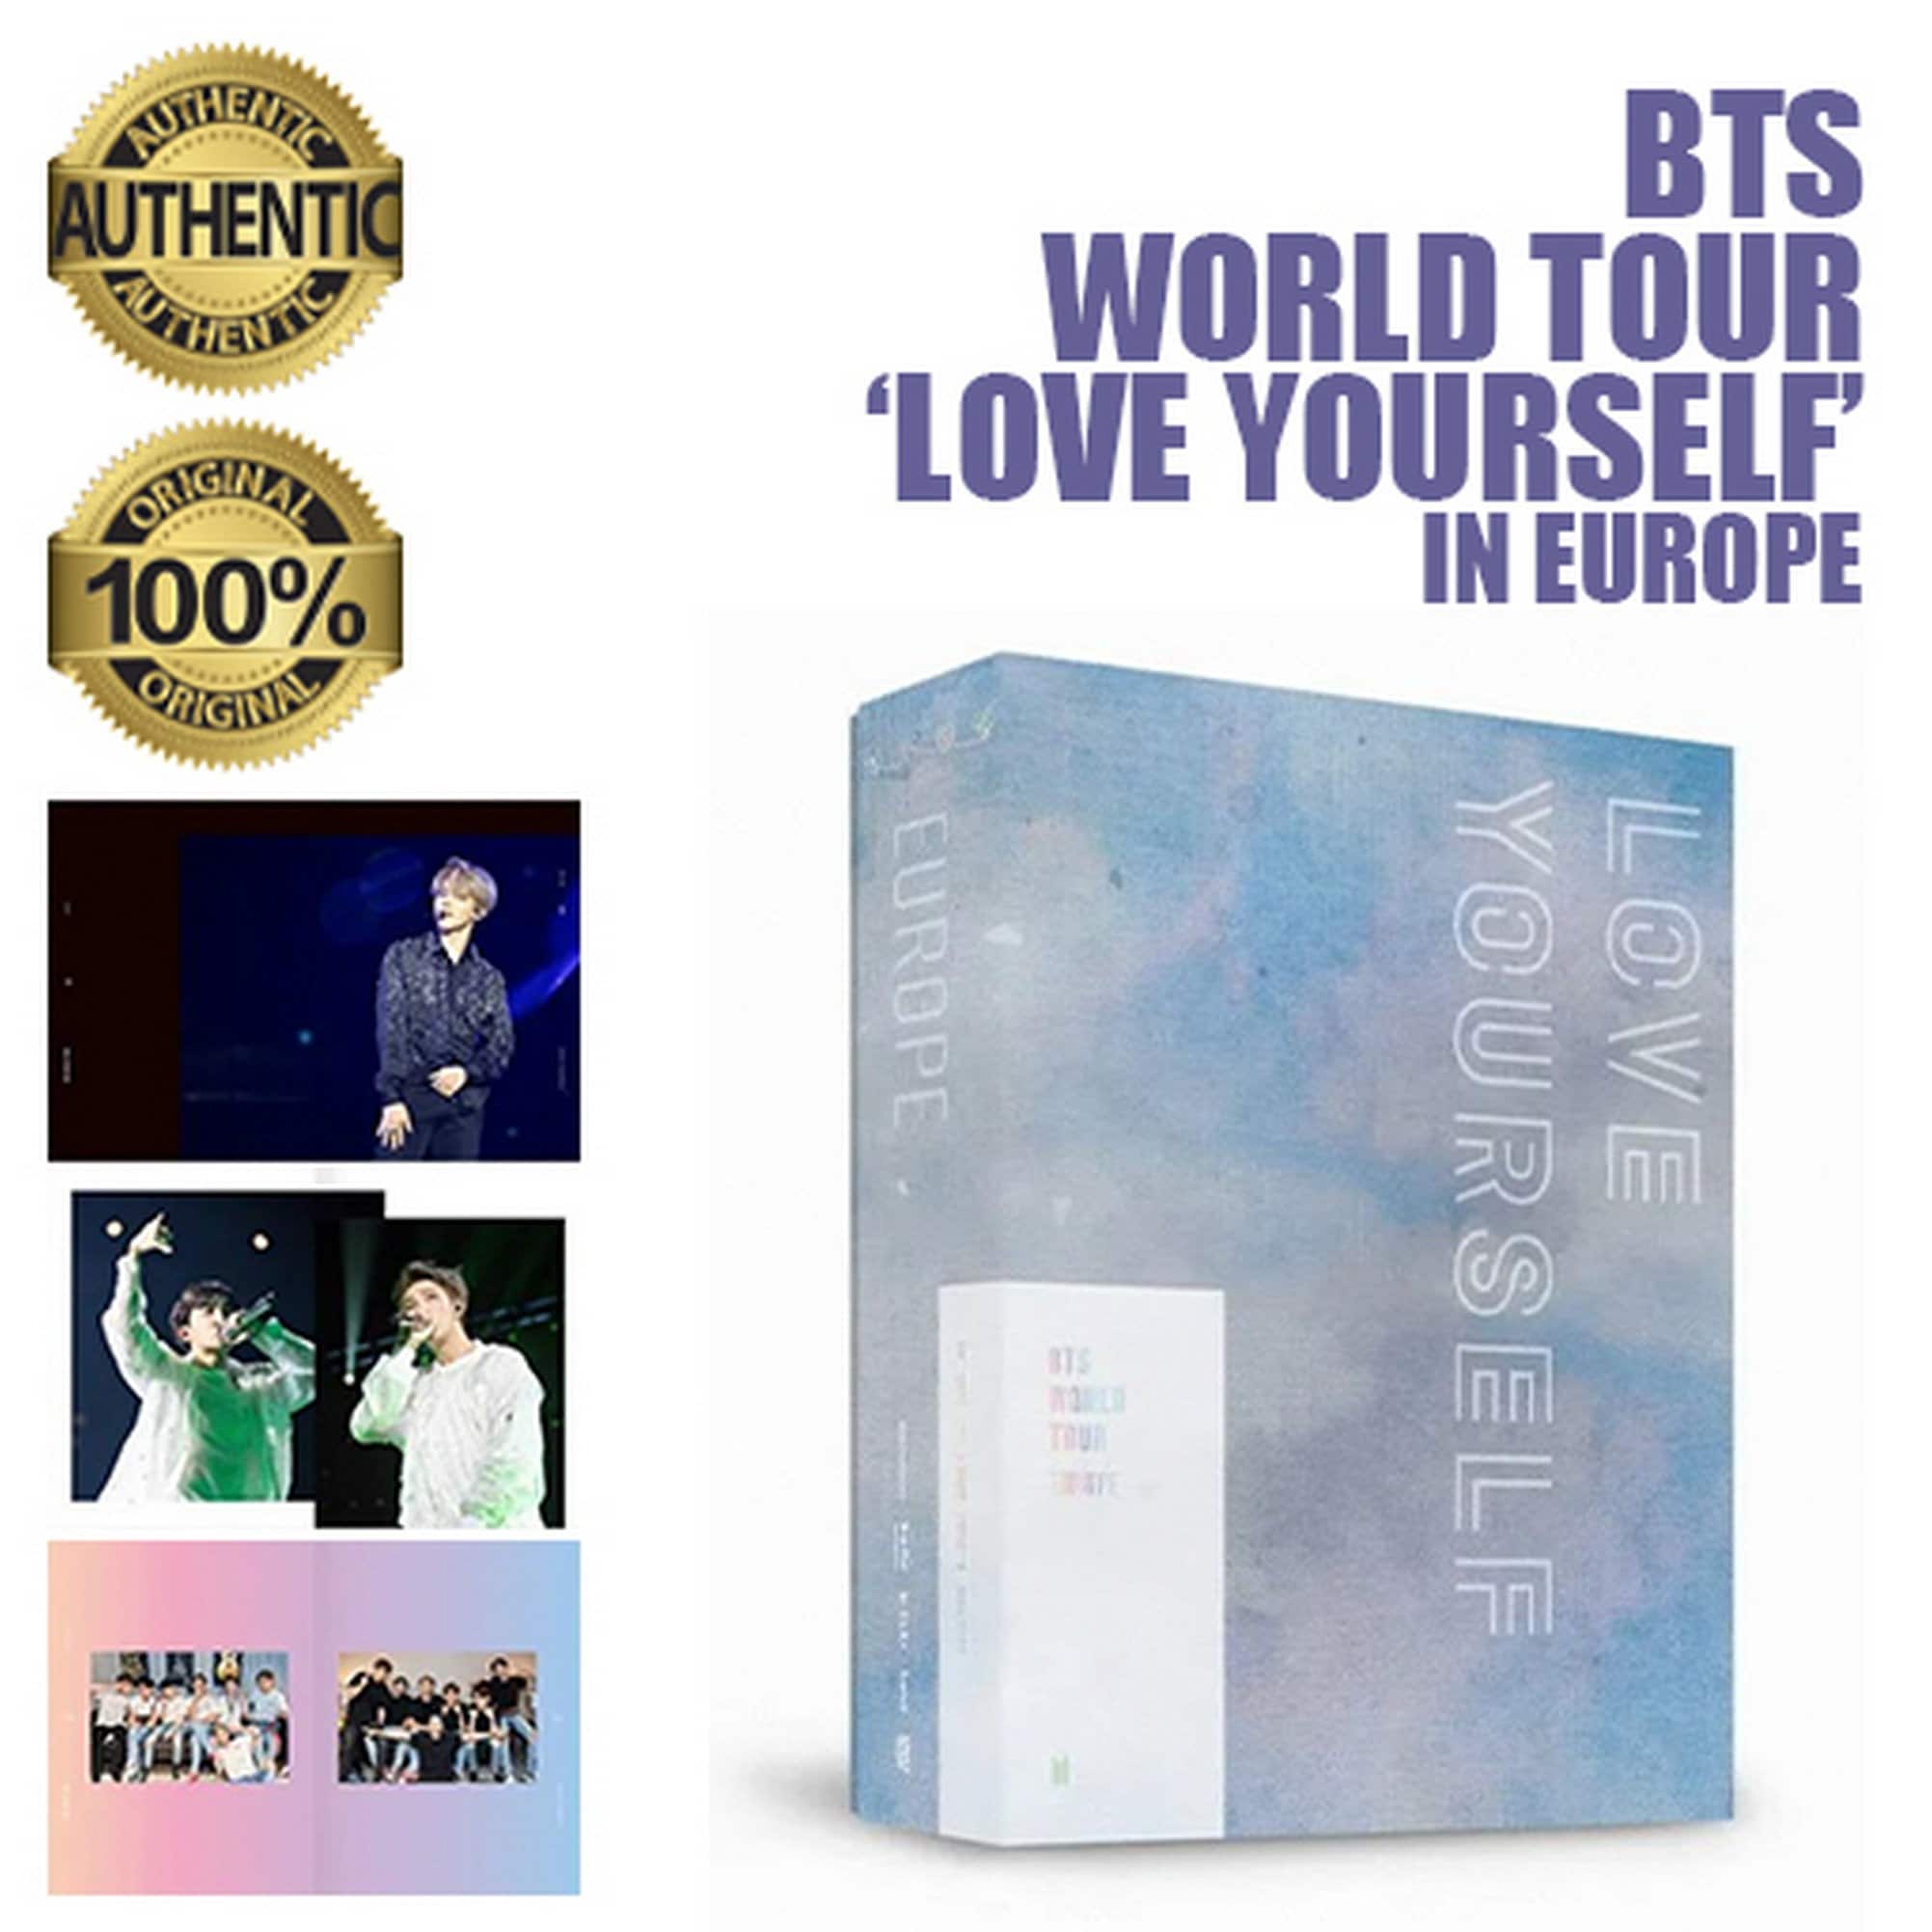 BTS World Tour Love Yourself Europe DVD Full Set With Free Gifts